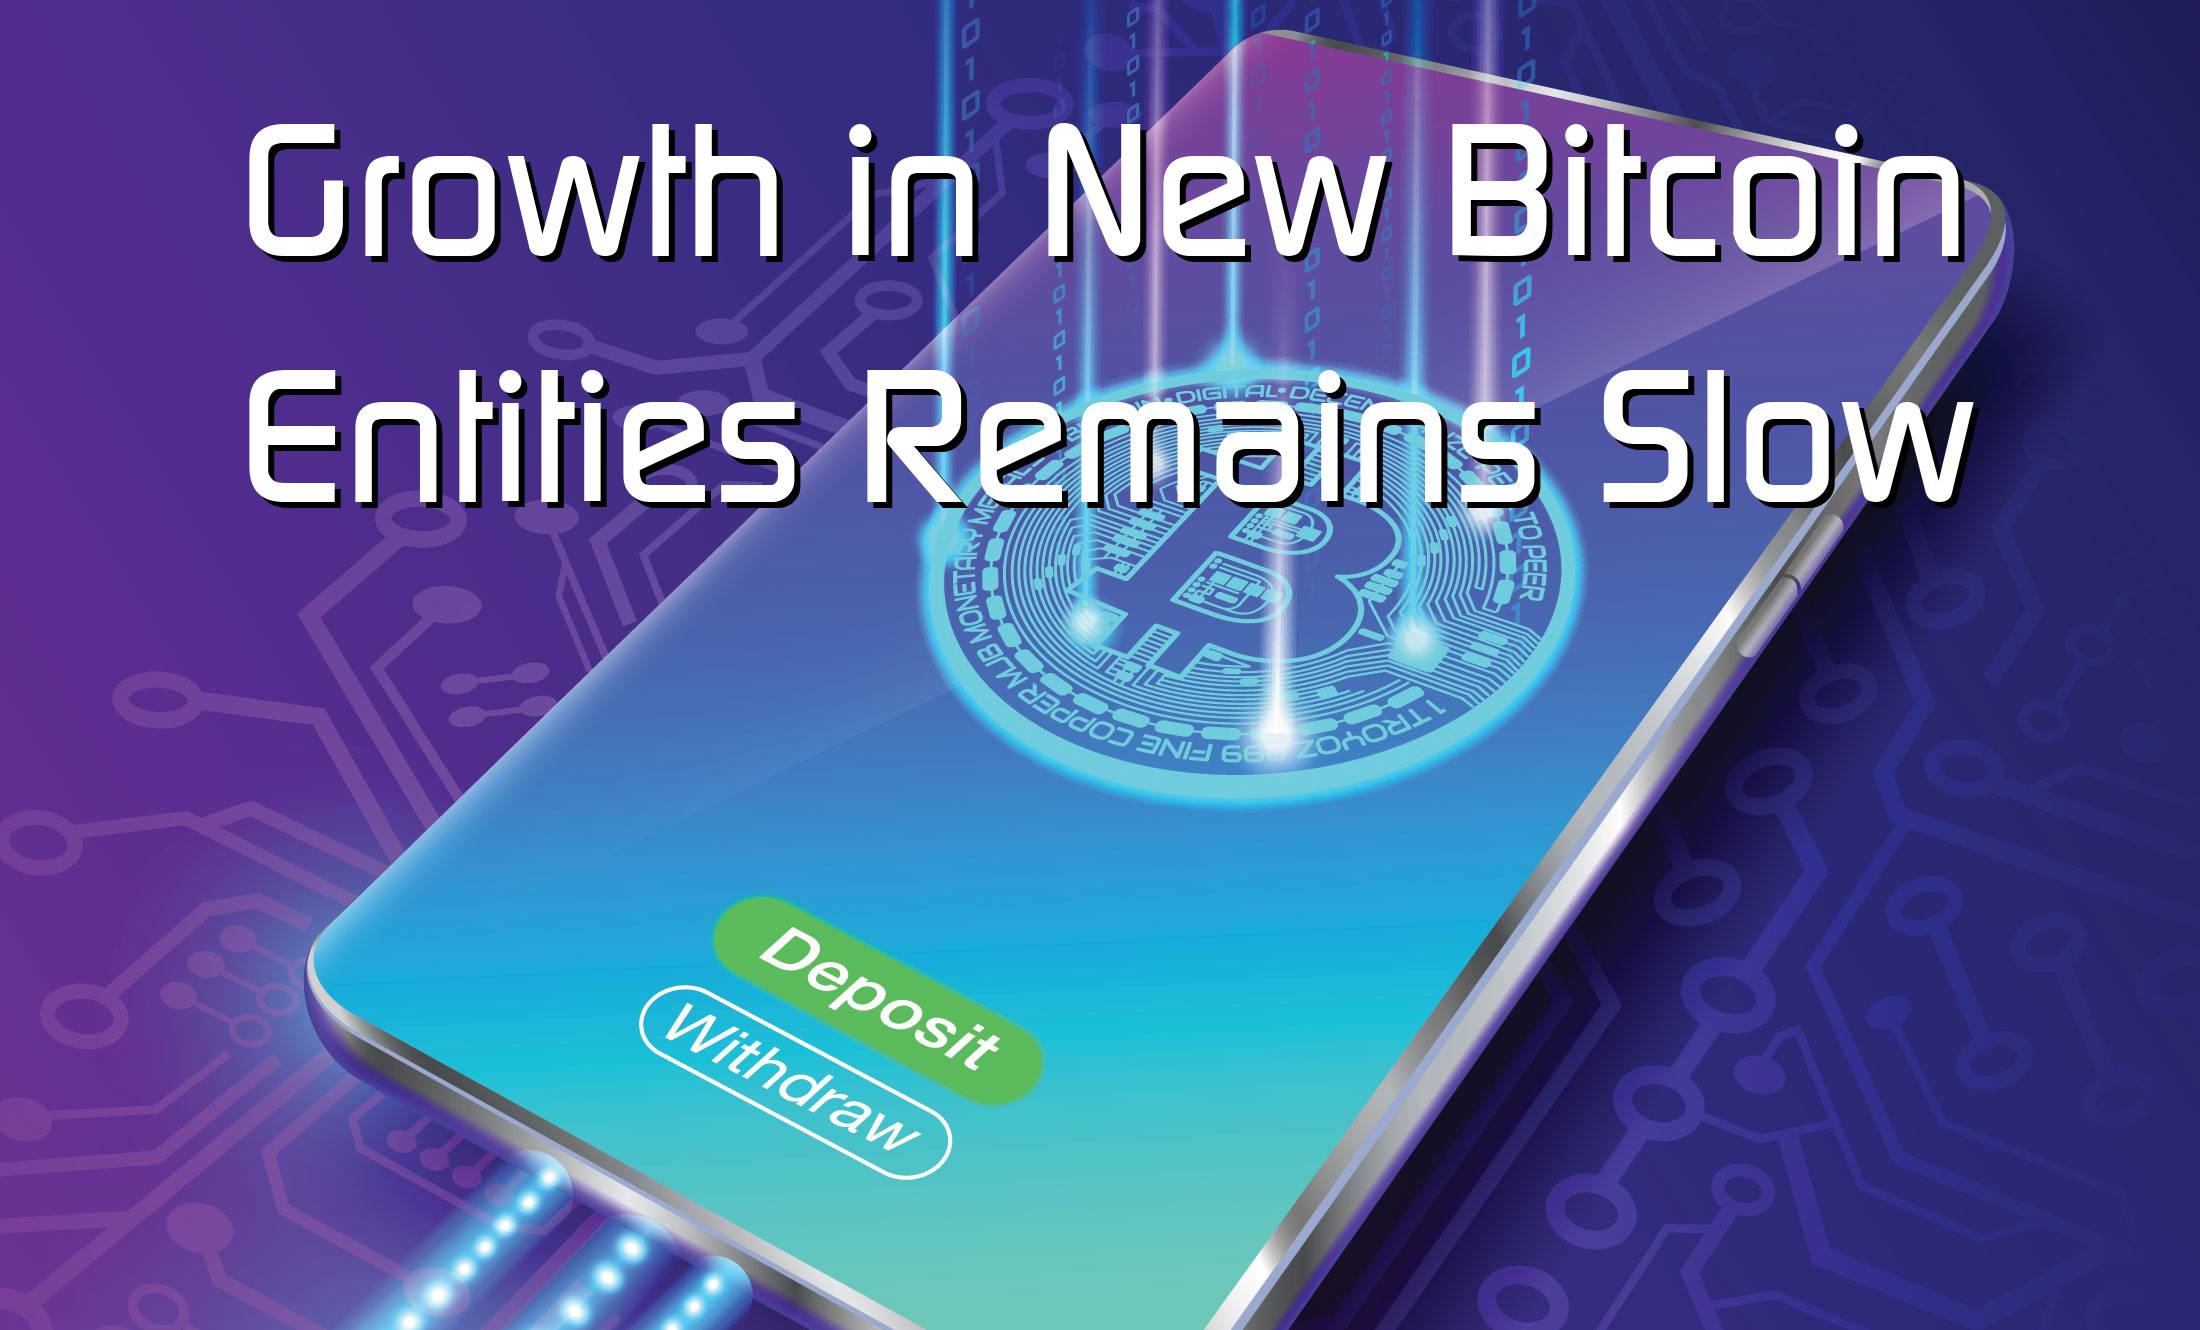 @$66712: Growth in New Bitcoin Entities Remains Slow